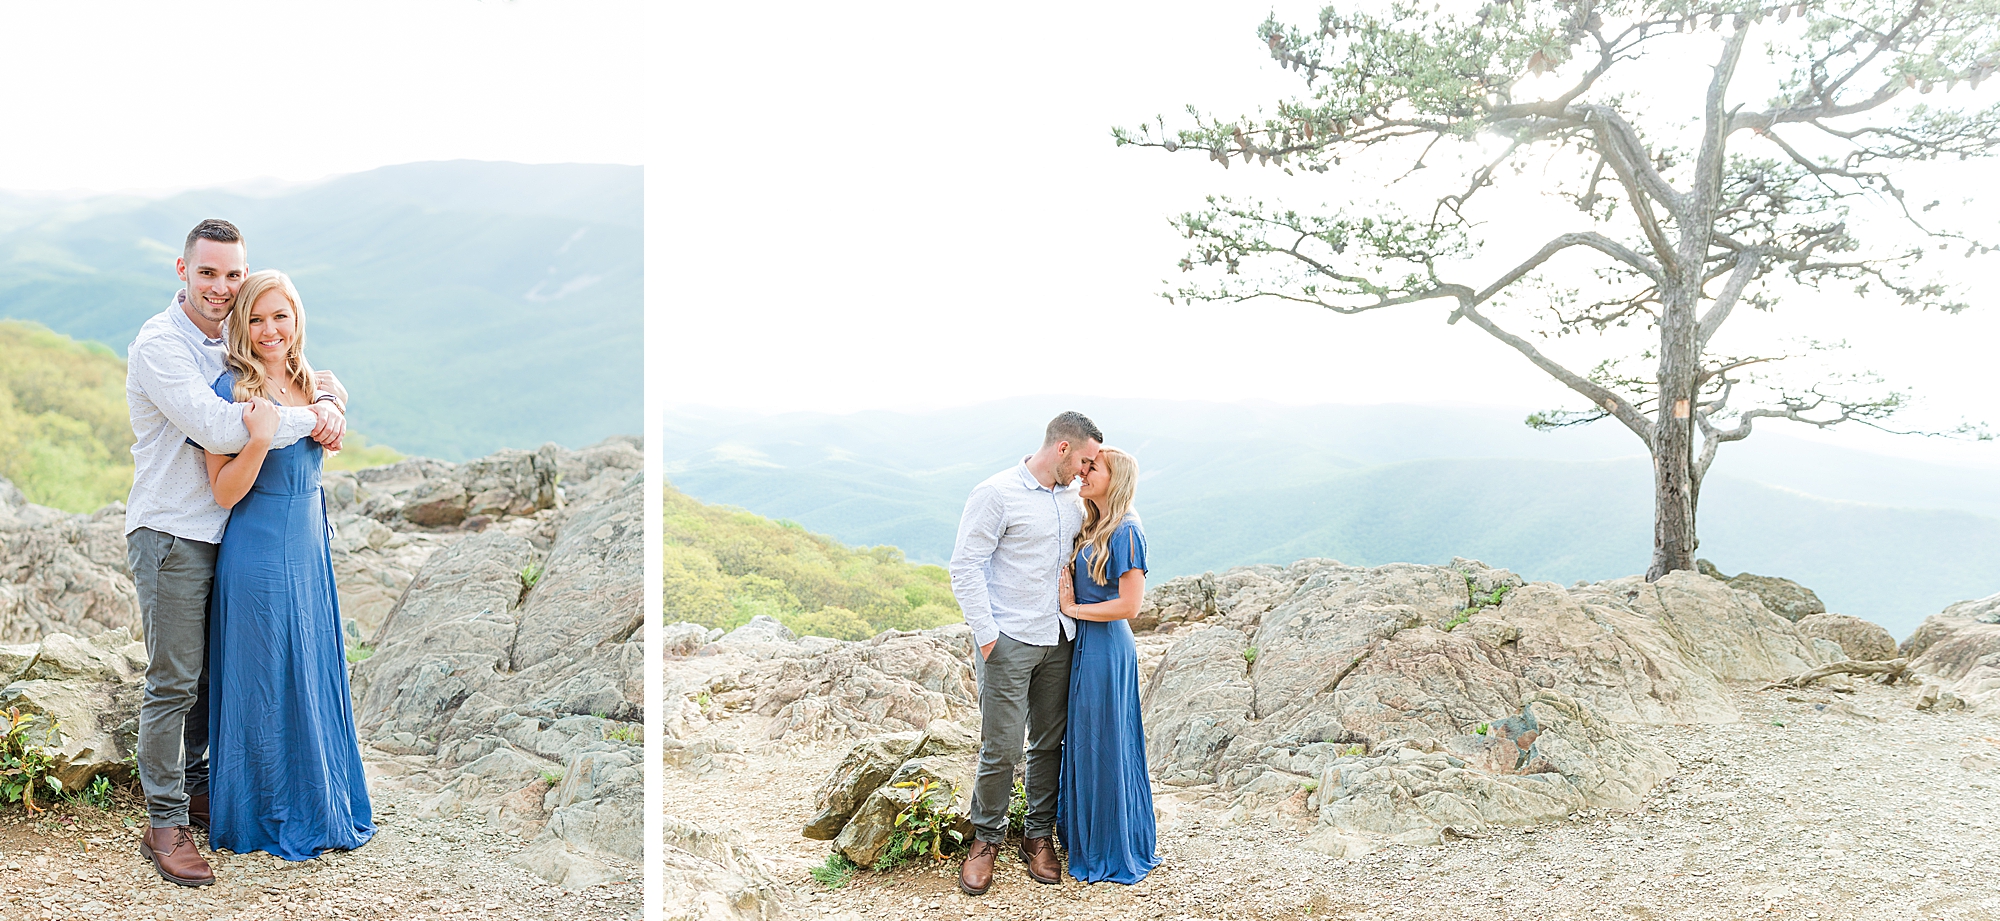 Engagement photos taken at Ravens Roost Overlook.